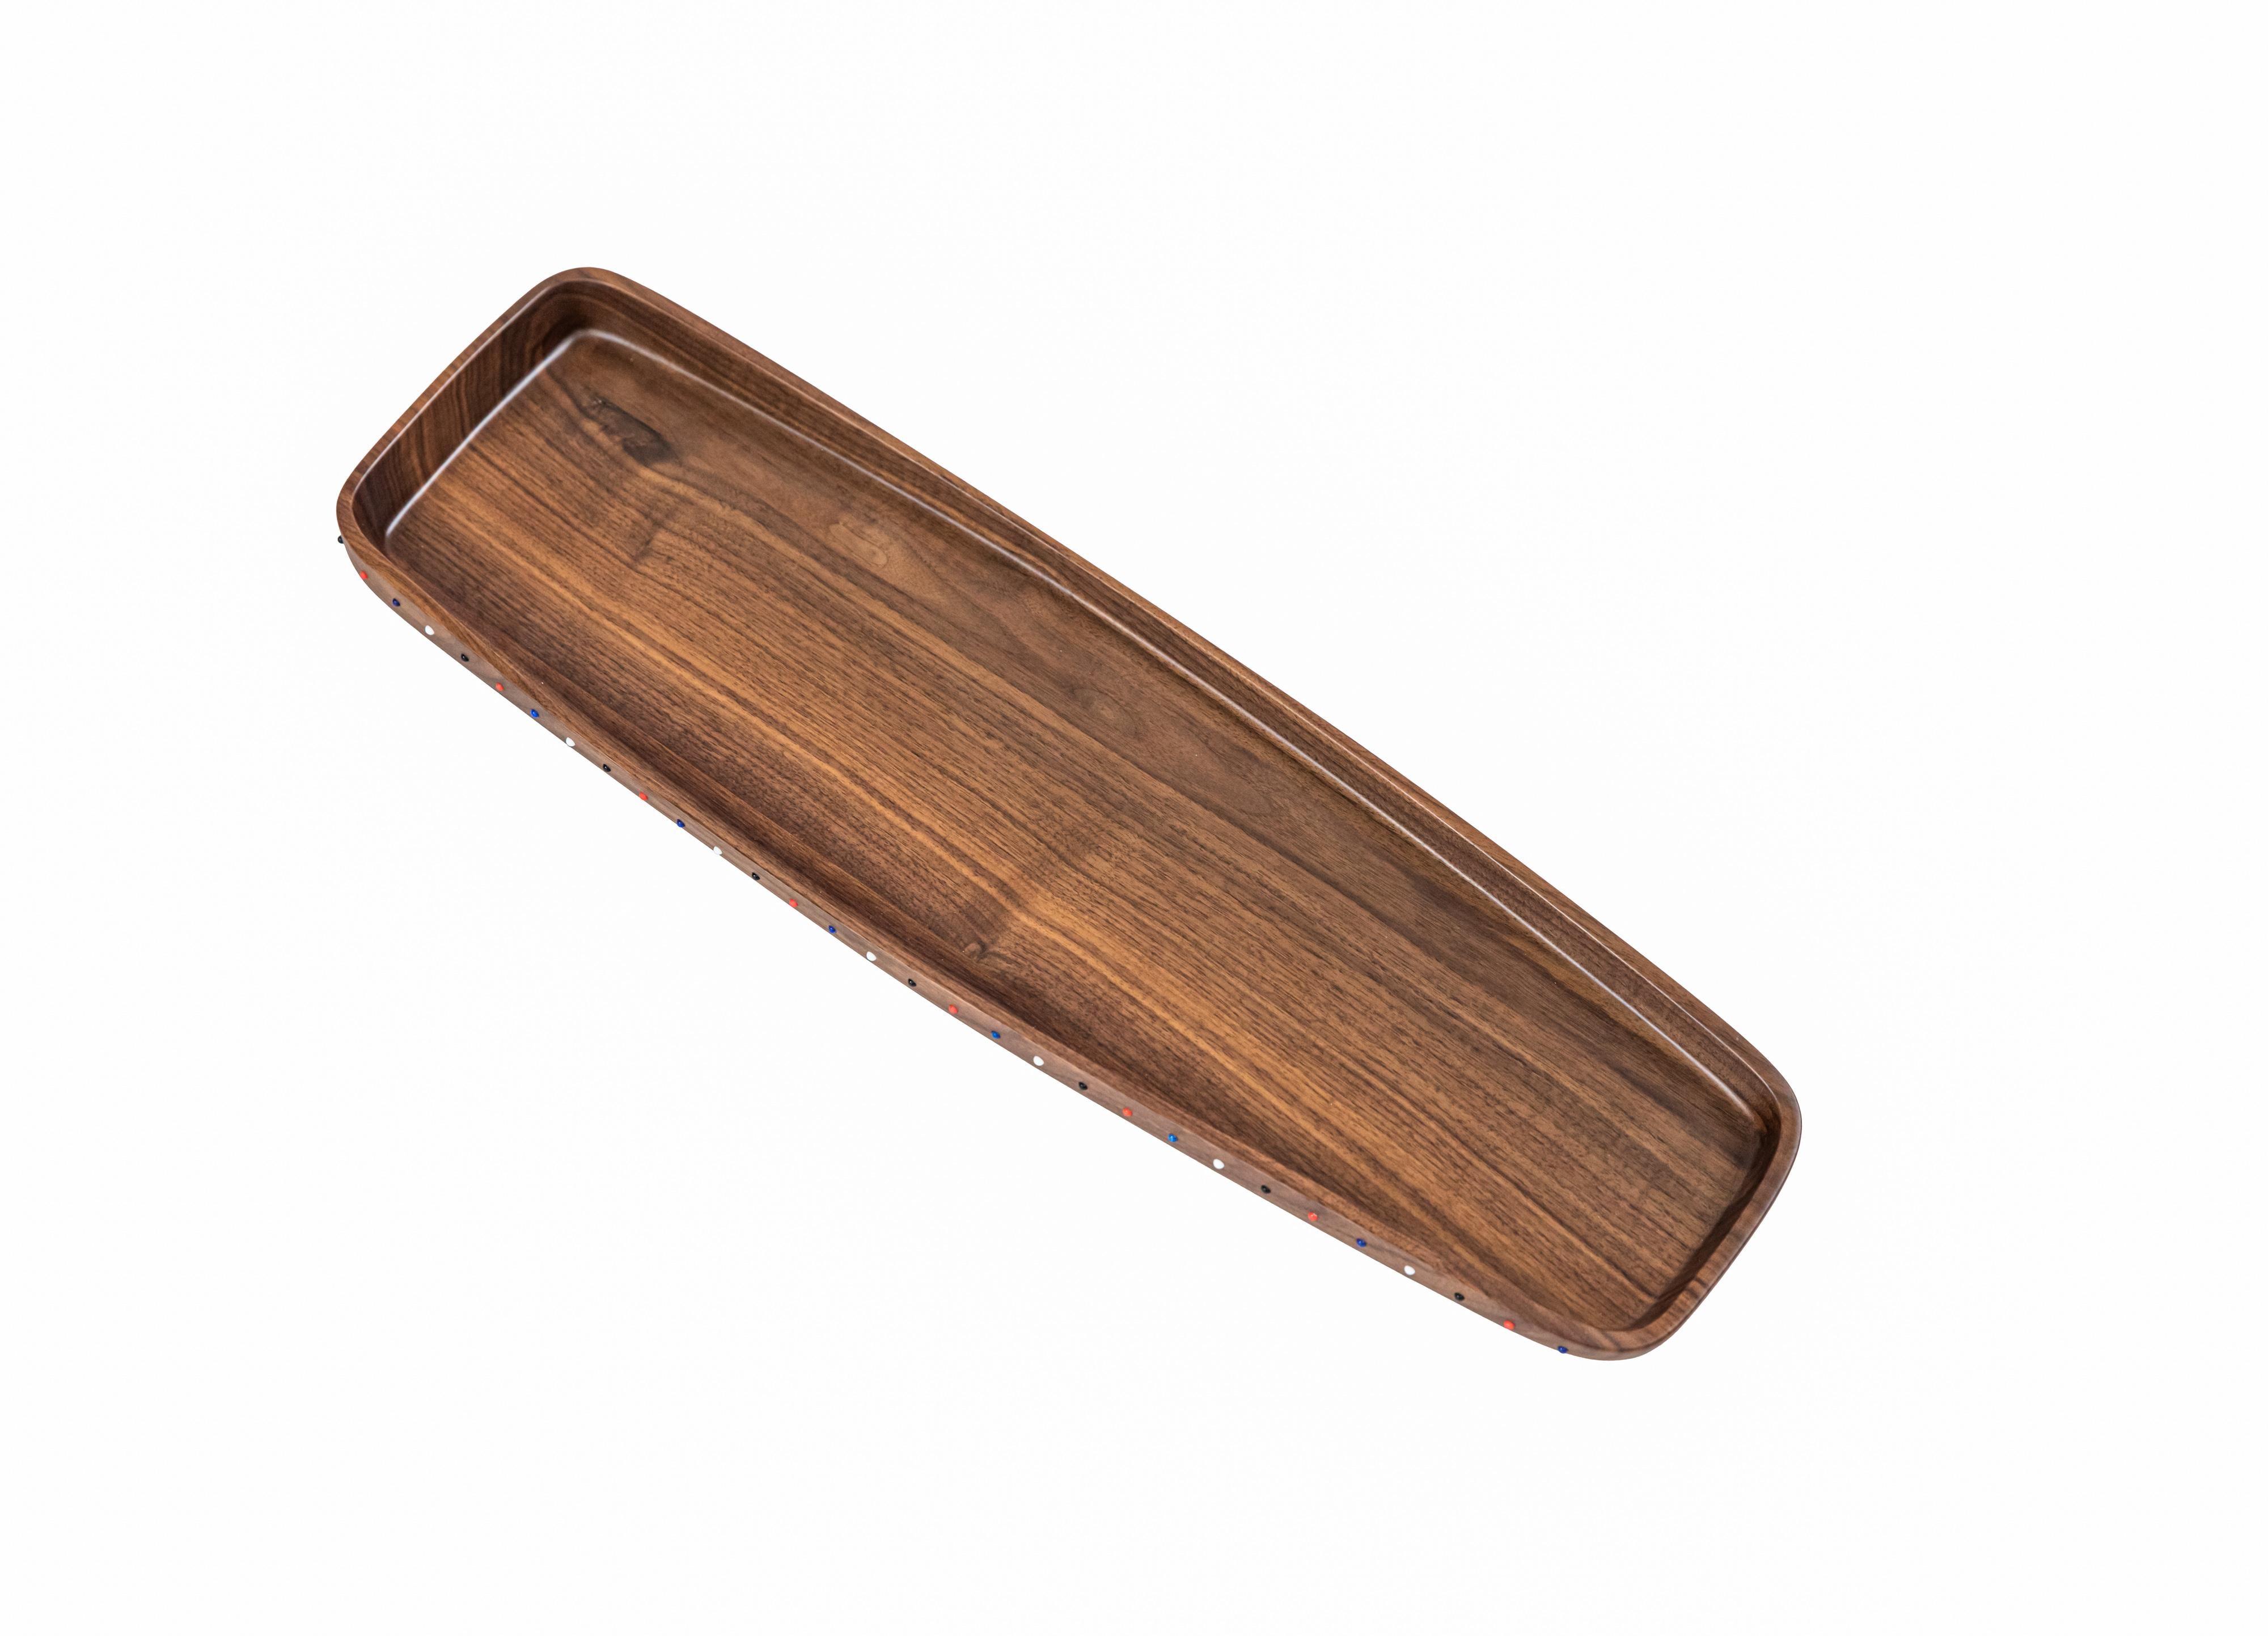 Kenyan Wooden serving tray of decorative walnut wood from the SoShiro Pok collection For Sale